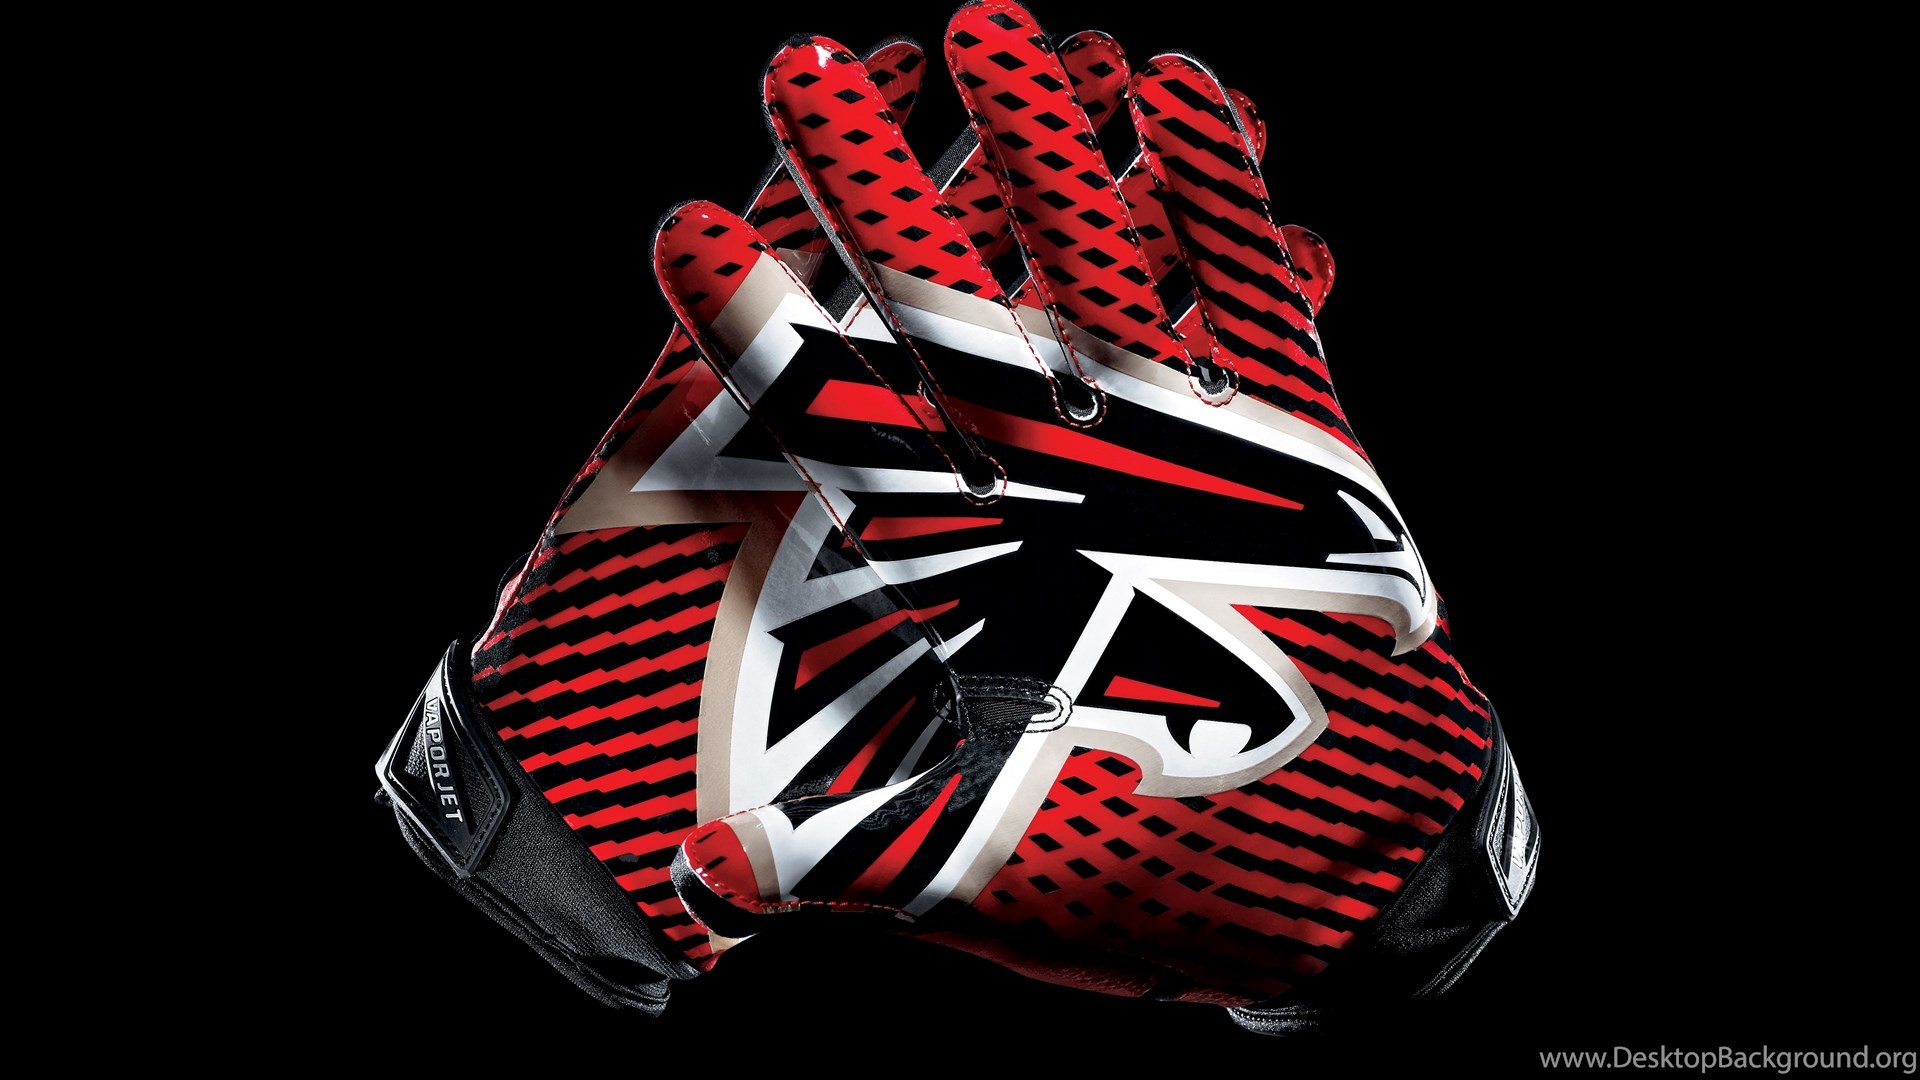 1920x1080 Marvelous Collections of Free Download Atlanta Falcons Football 2019  Backgrounds For Desktop, Laptop and Mobiles.